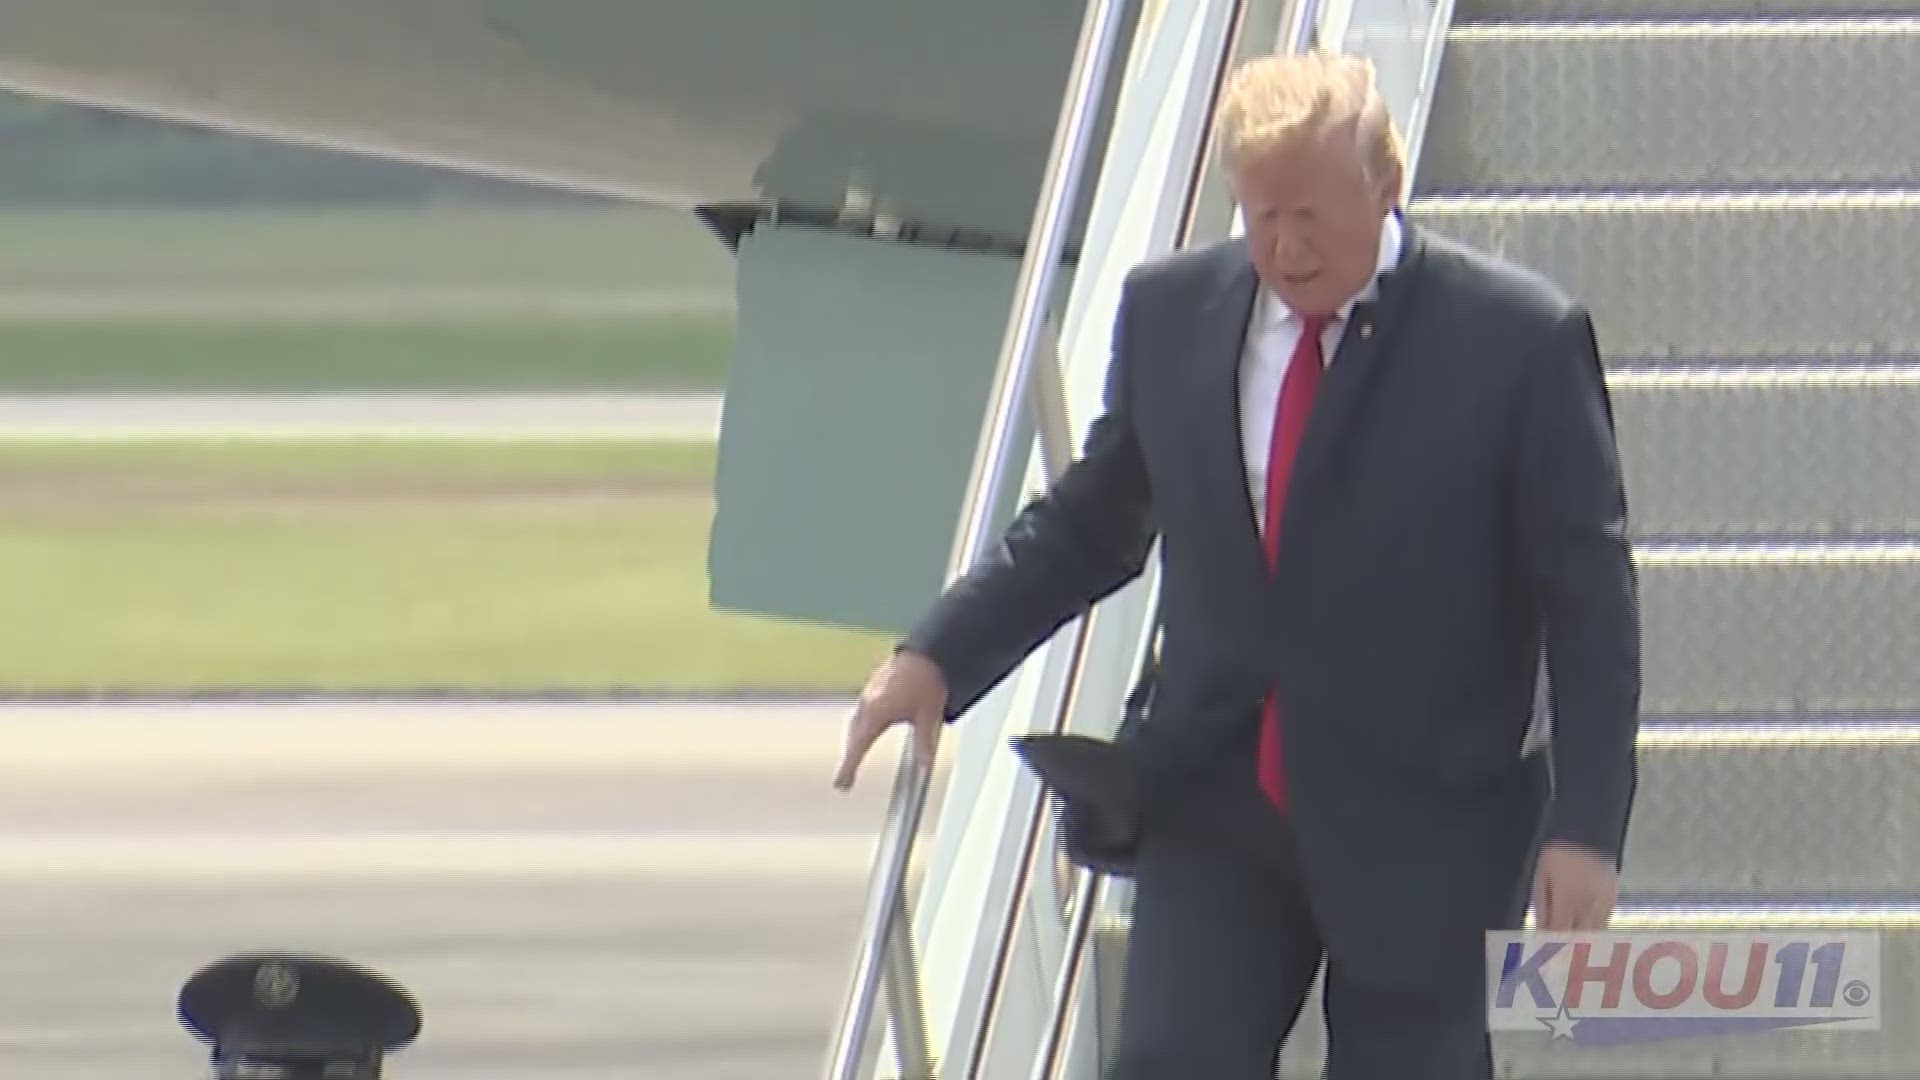 President Trump at Ellington Field in Houston to meet with families of the victims of the Santa Fe HS shooting. He'll then head downtown for a fundraiser.